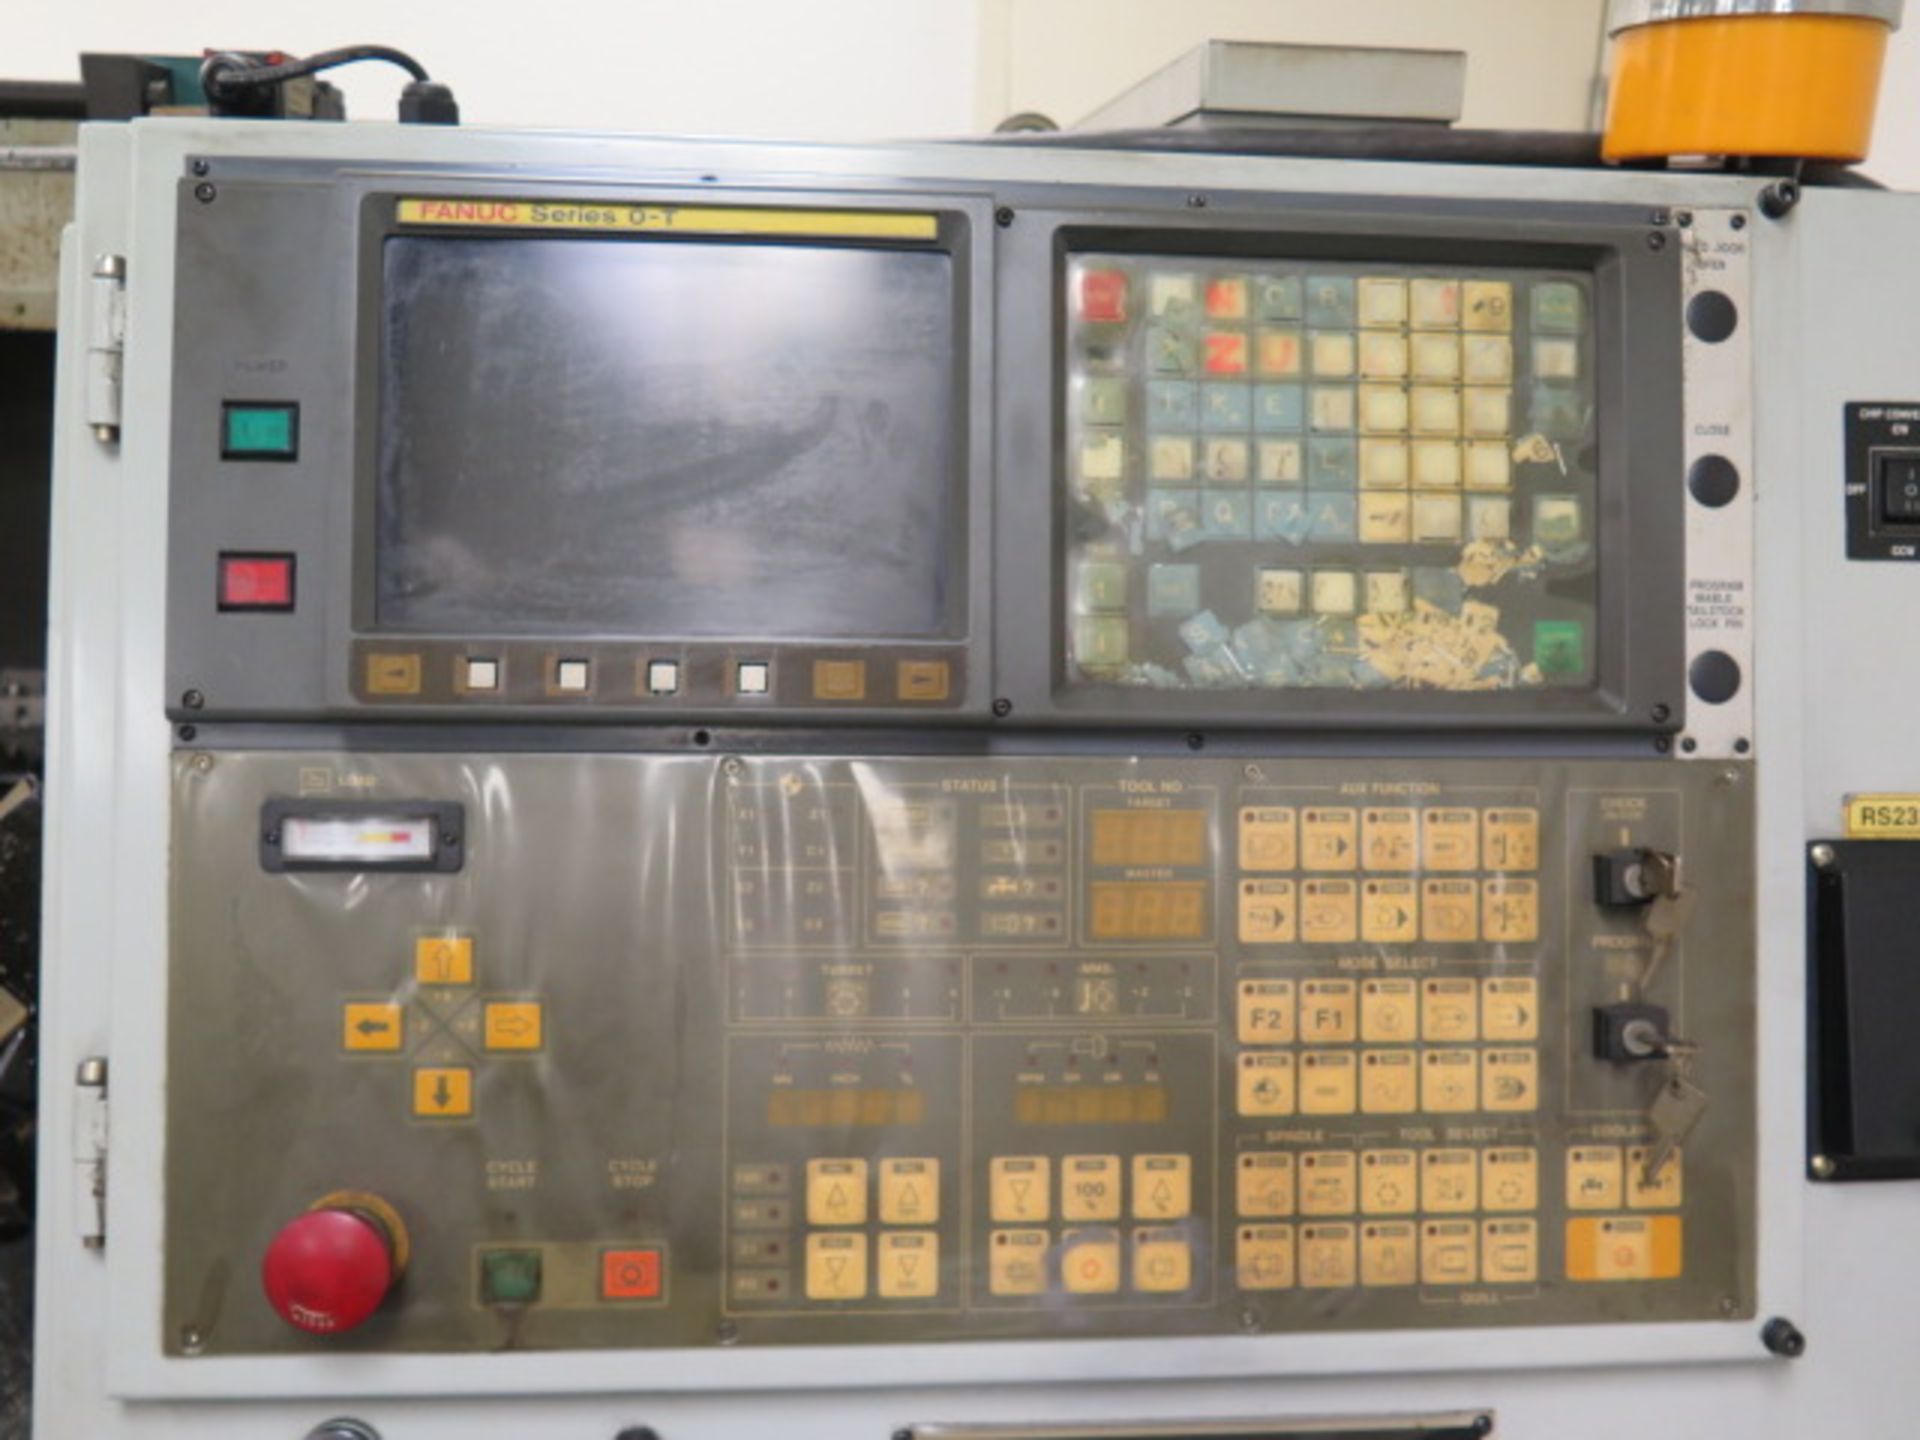 1999 Akira Seiki SL30 CNC Turning Center s/n 99TD105-056 w/ Fanuc Series 0-T Controls, SOLD AS IS - Image 9 of 14